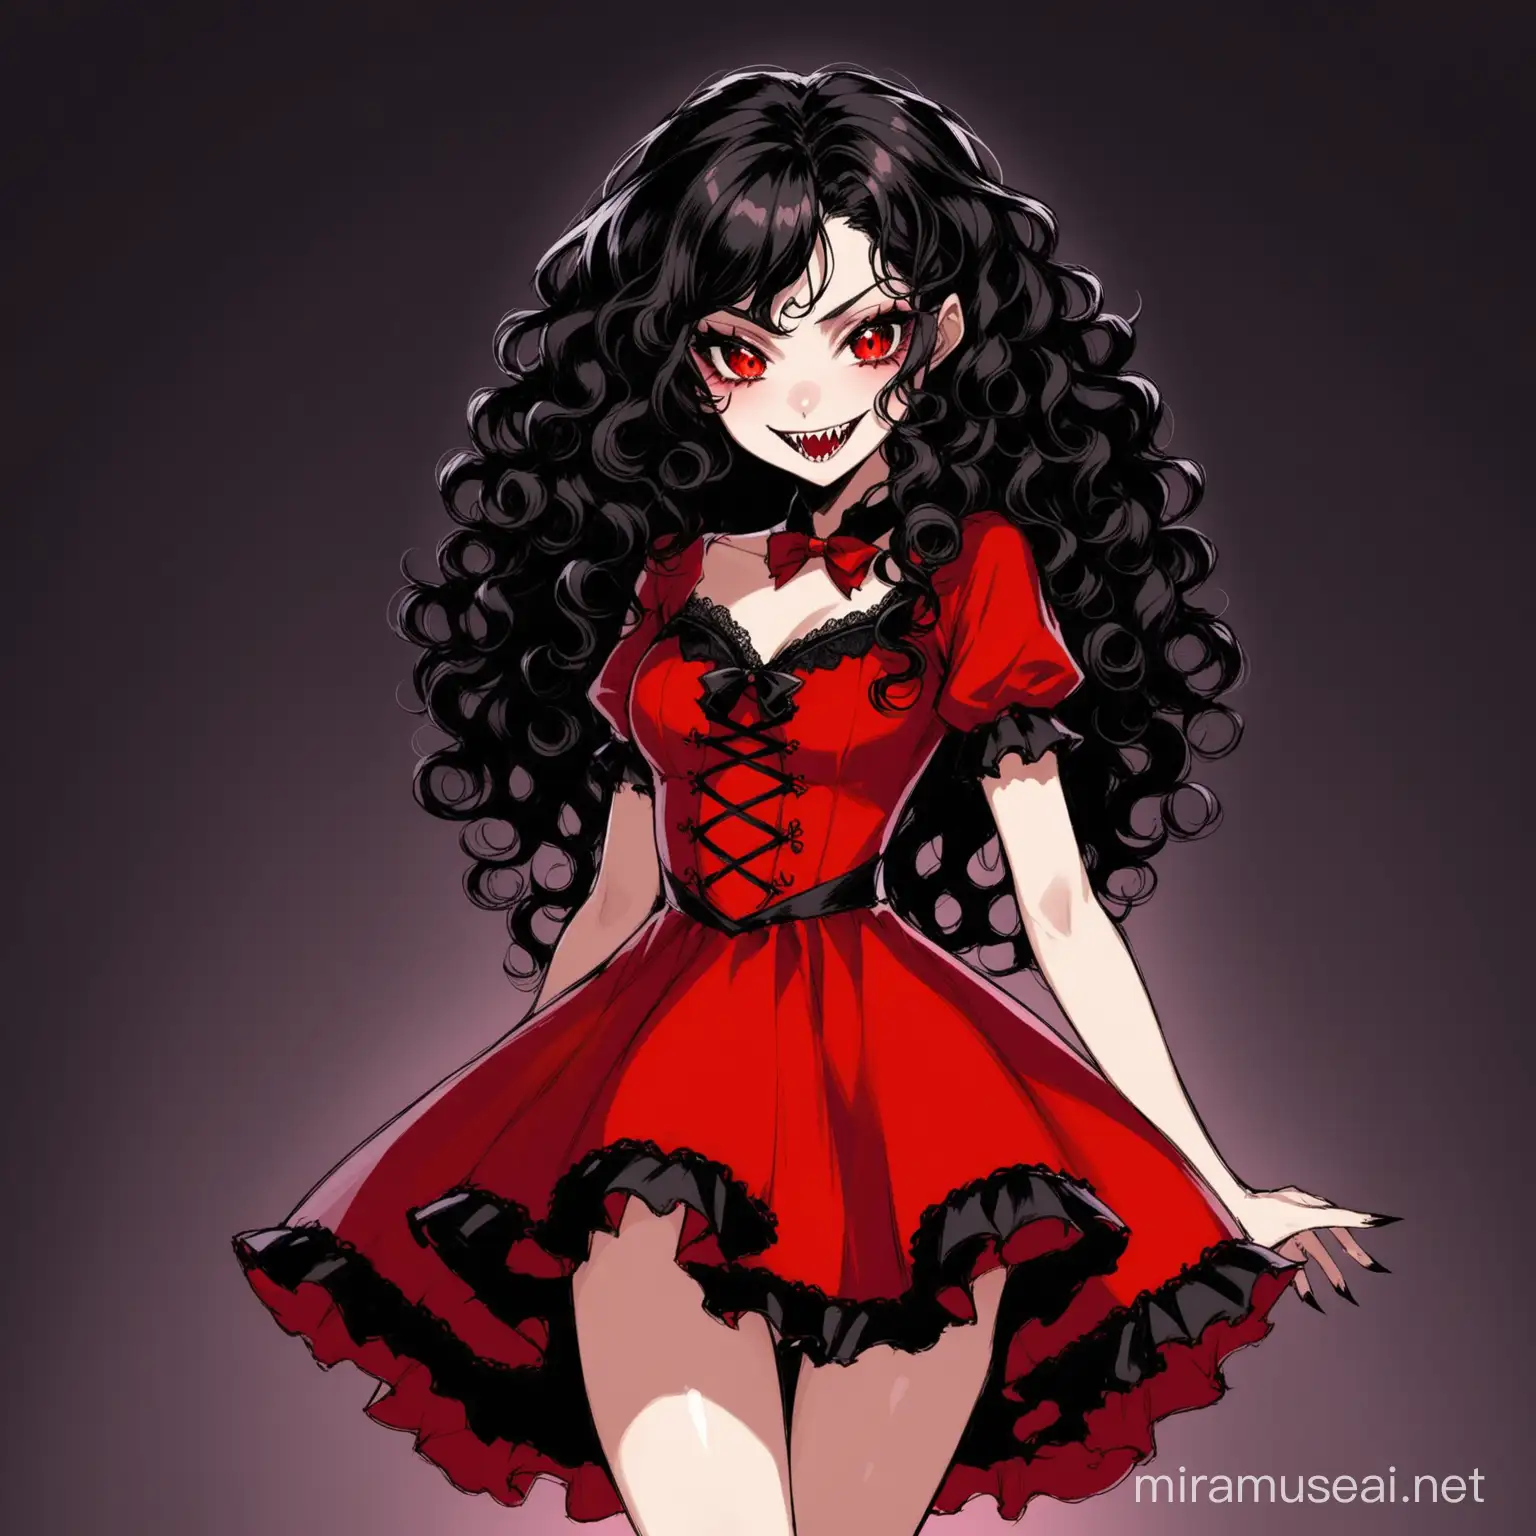 Teen Vampire in Alluring Black and Red Outfit